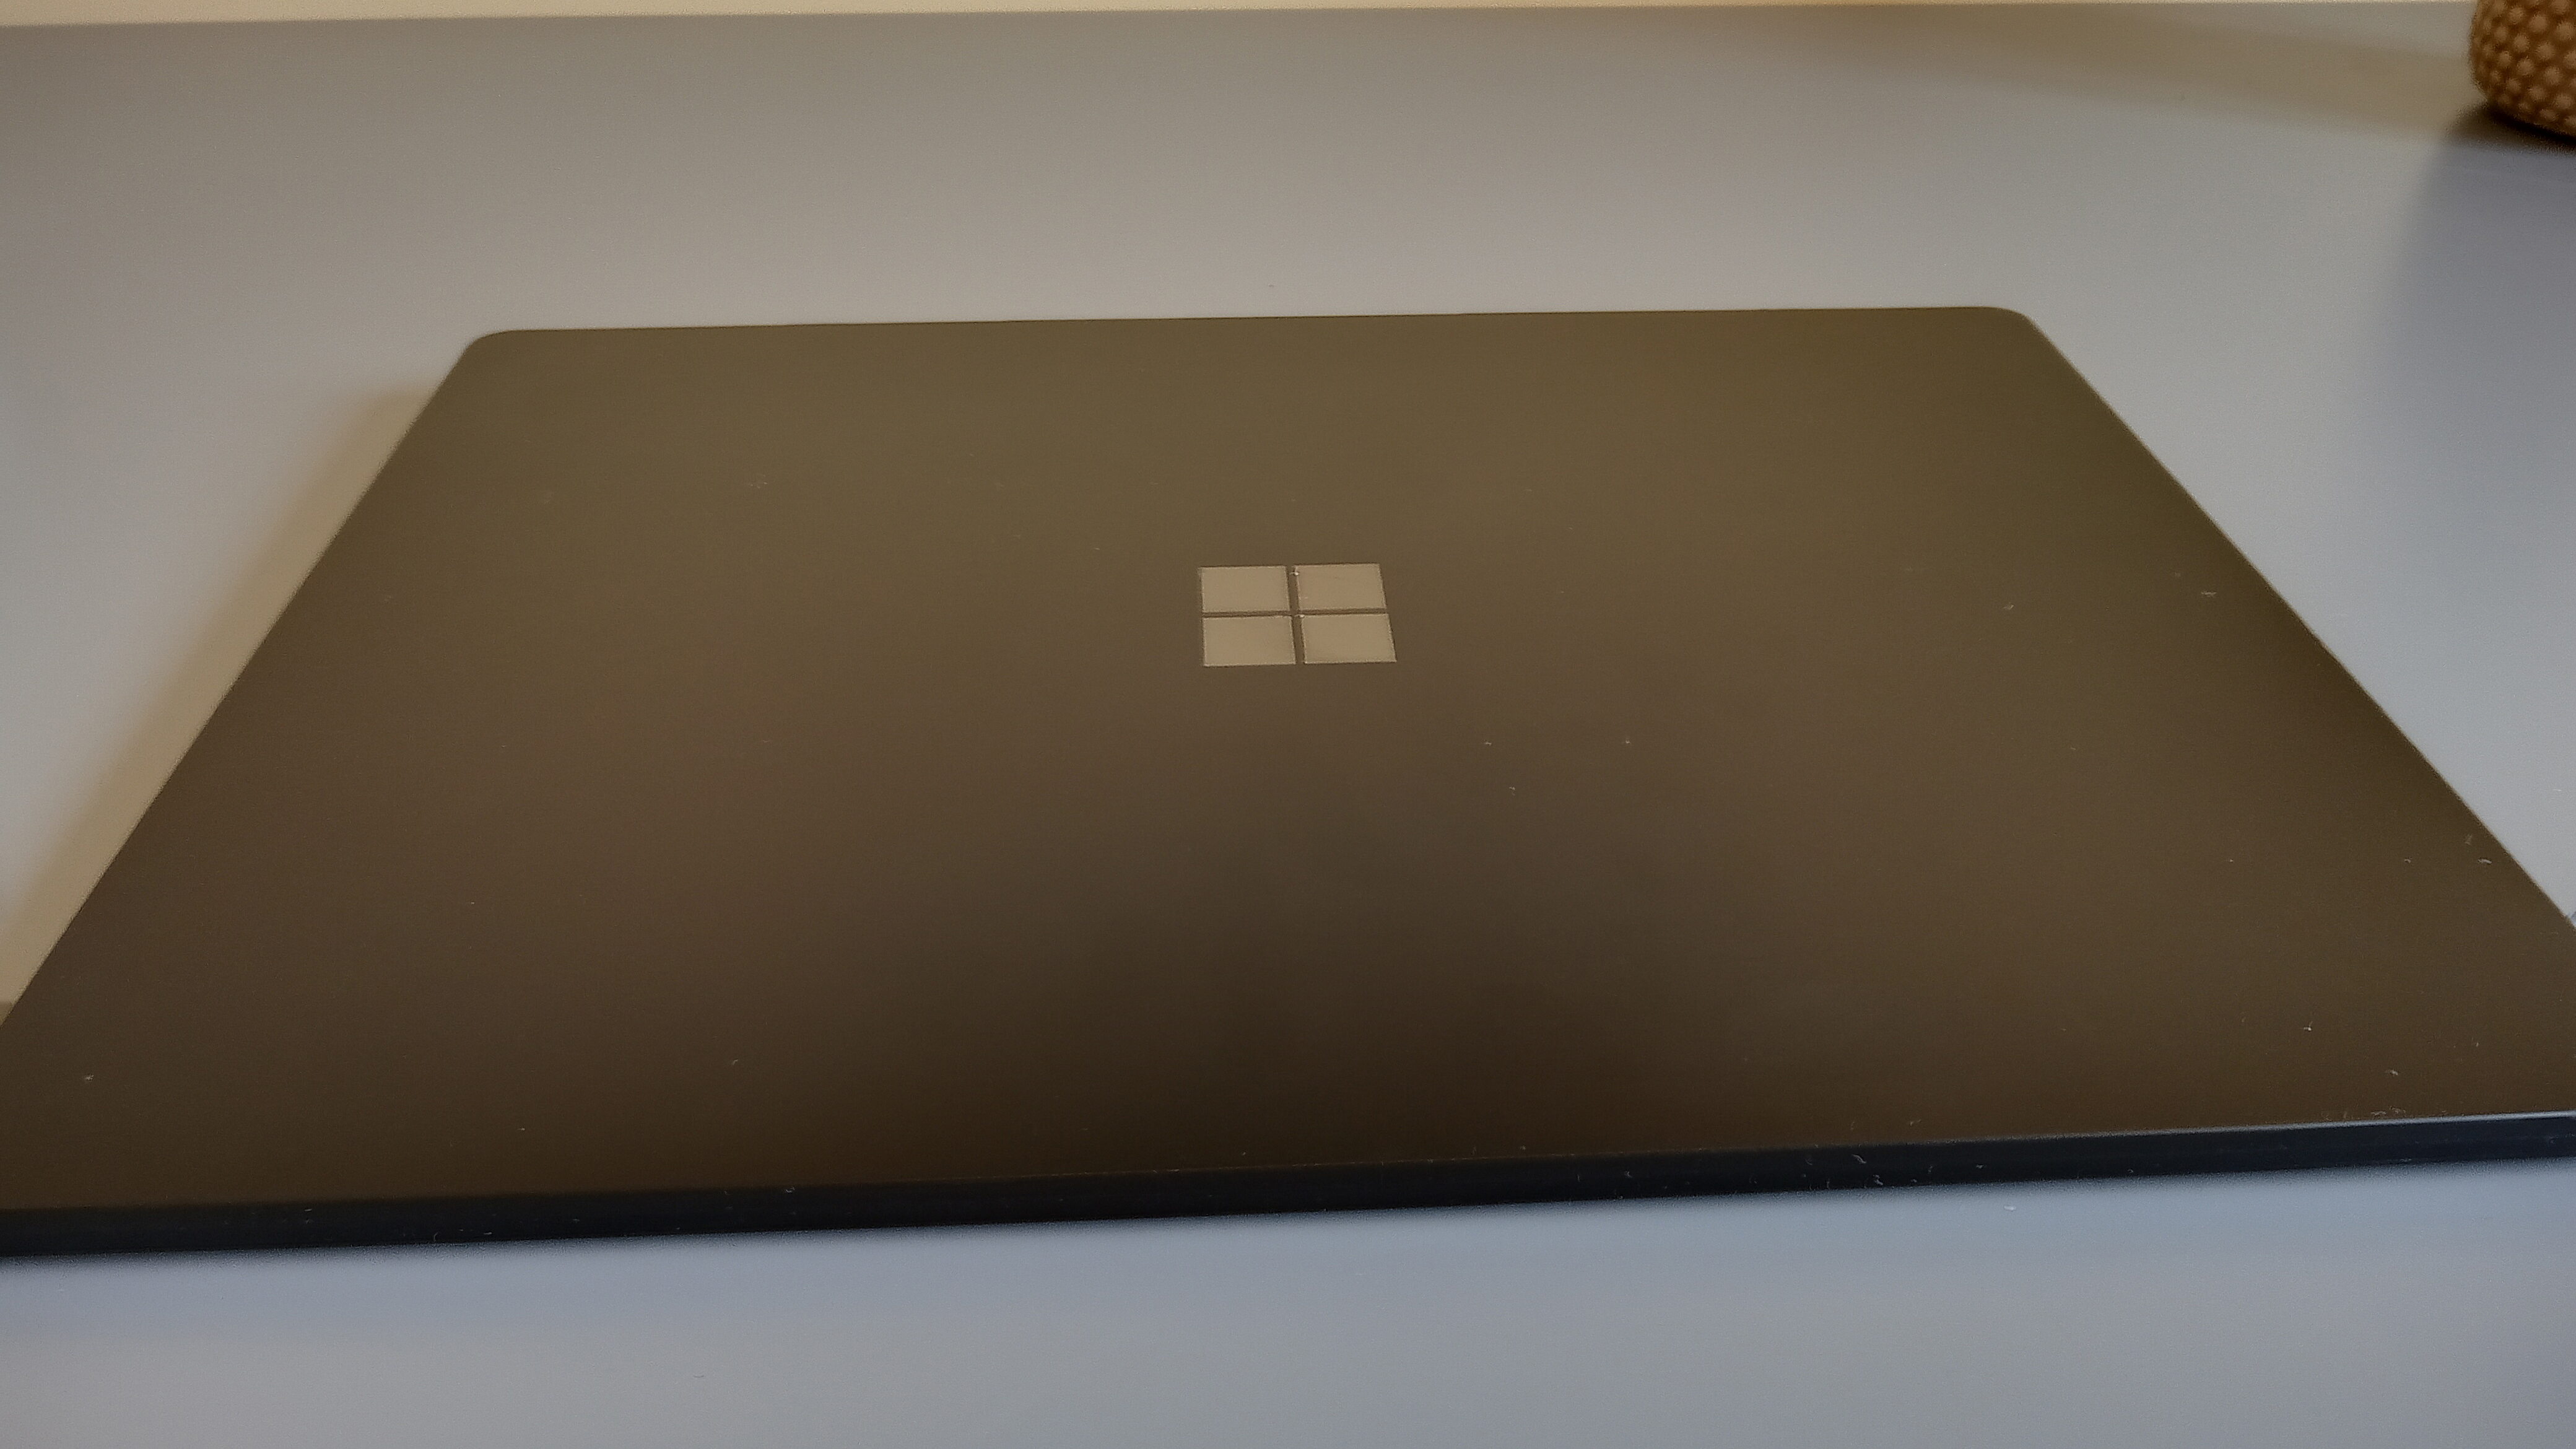 The Microsoft Surface Laptop 4 in black